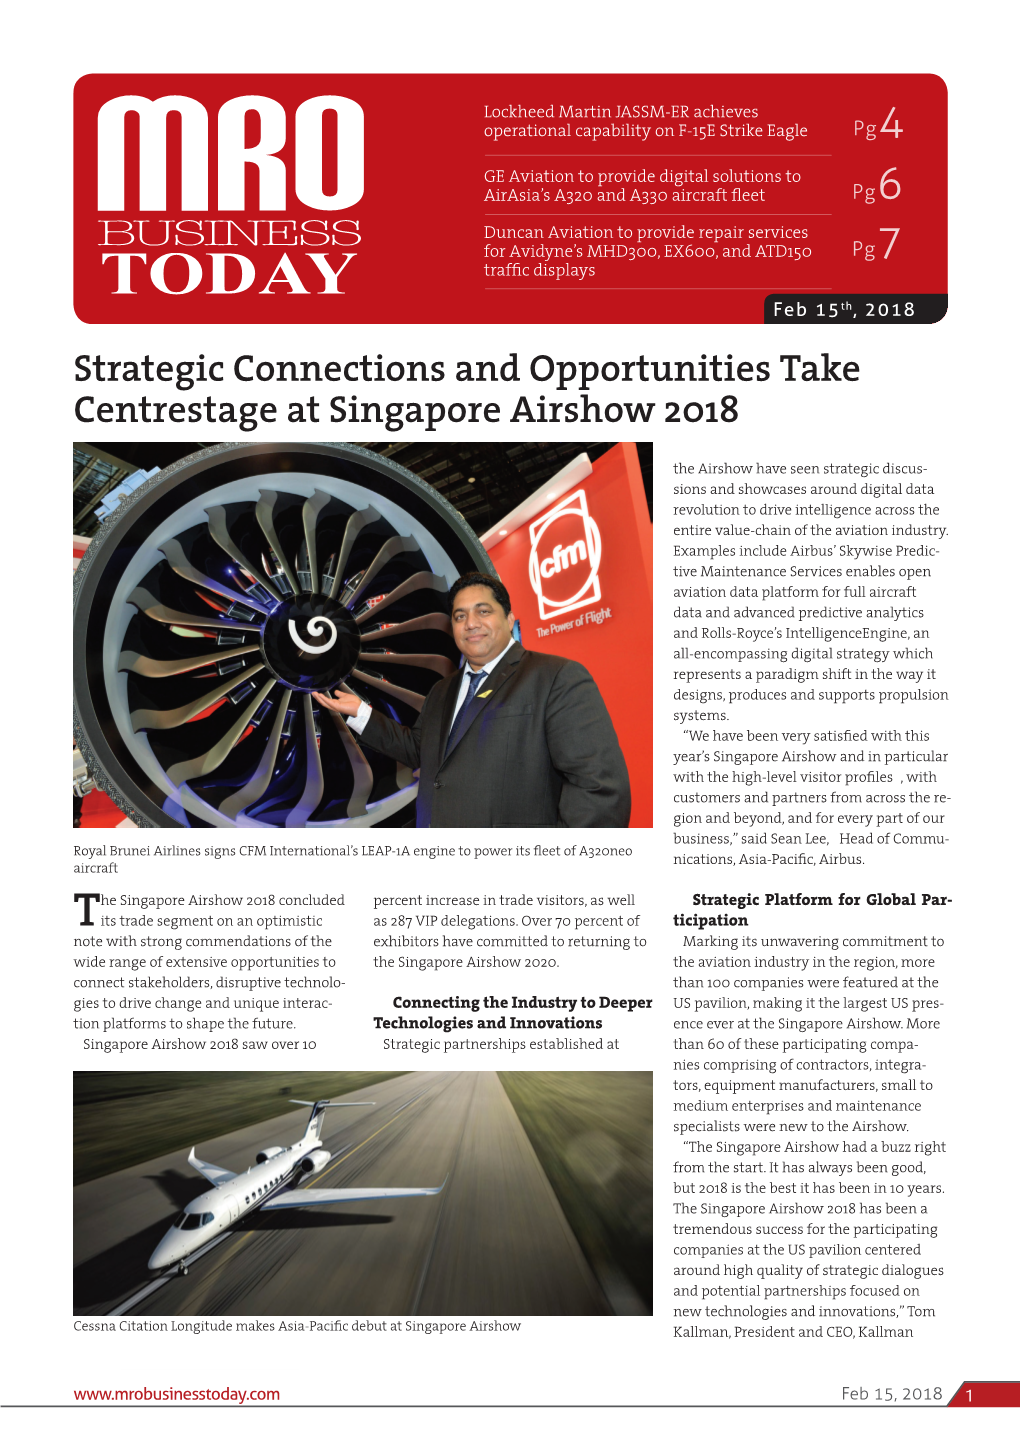 Strategic Connections and Opportunities Take Centrestage at Singapore Airshow 2018